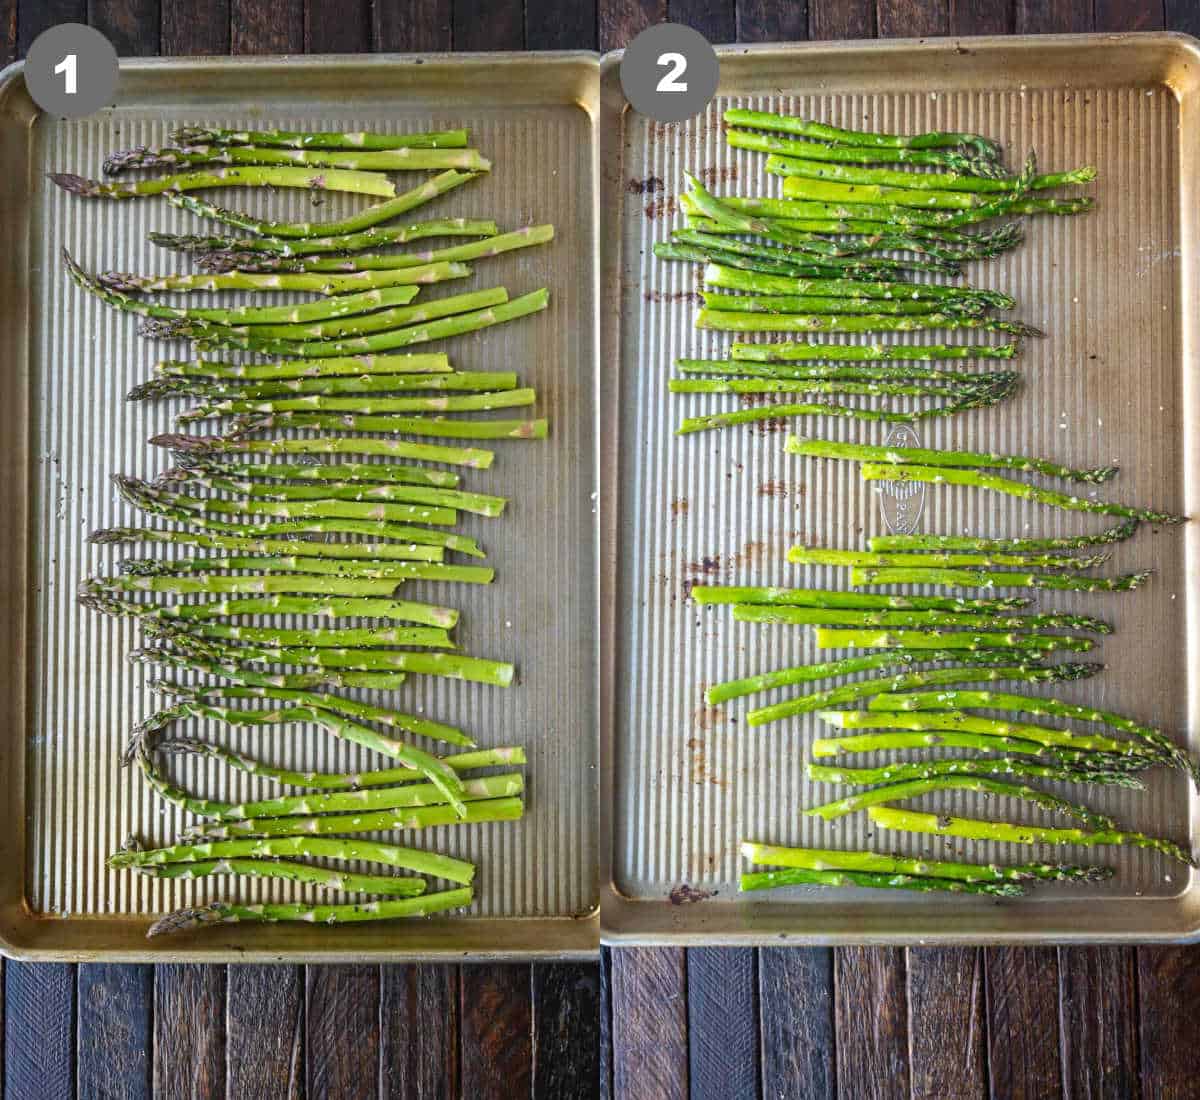 Raw asparagus placed on a baking sheet and roasted.